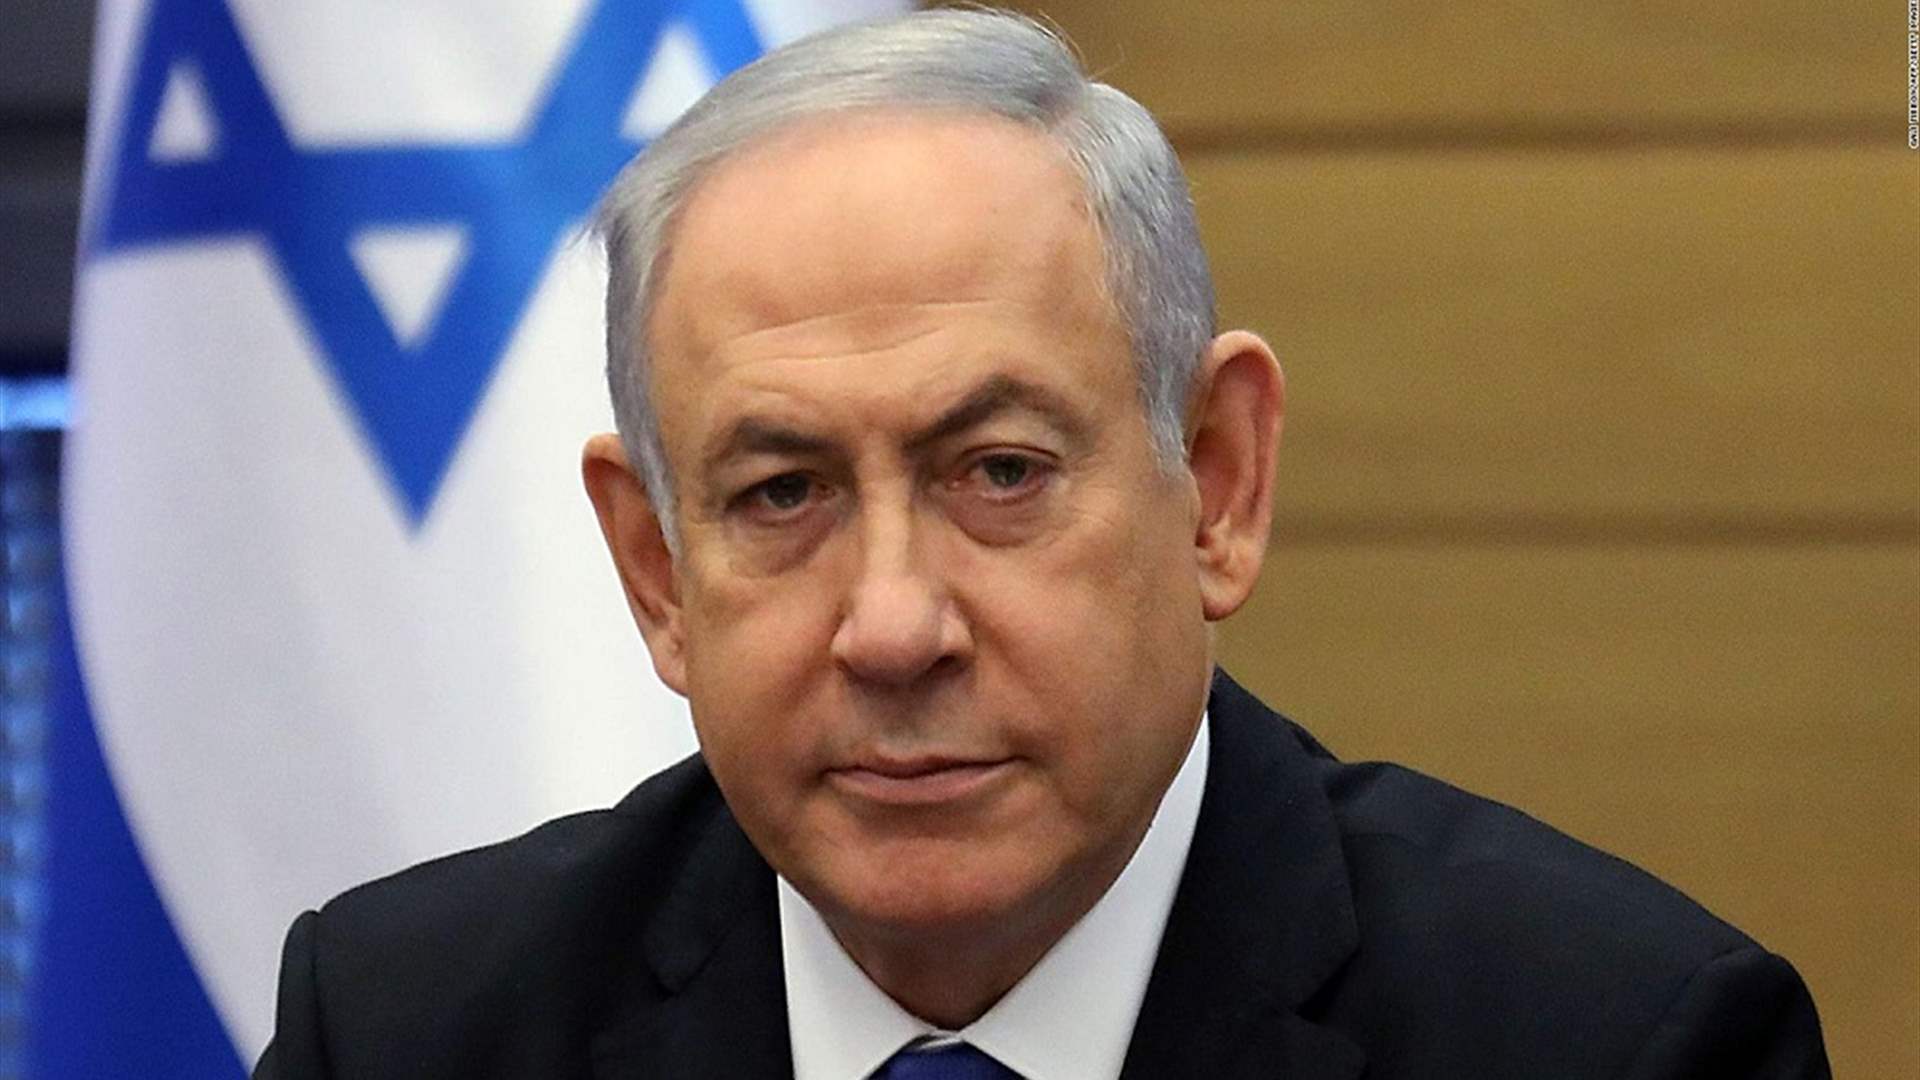 Does Netanyahu instigate conflicts to distract from internal strife in Israel?